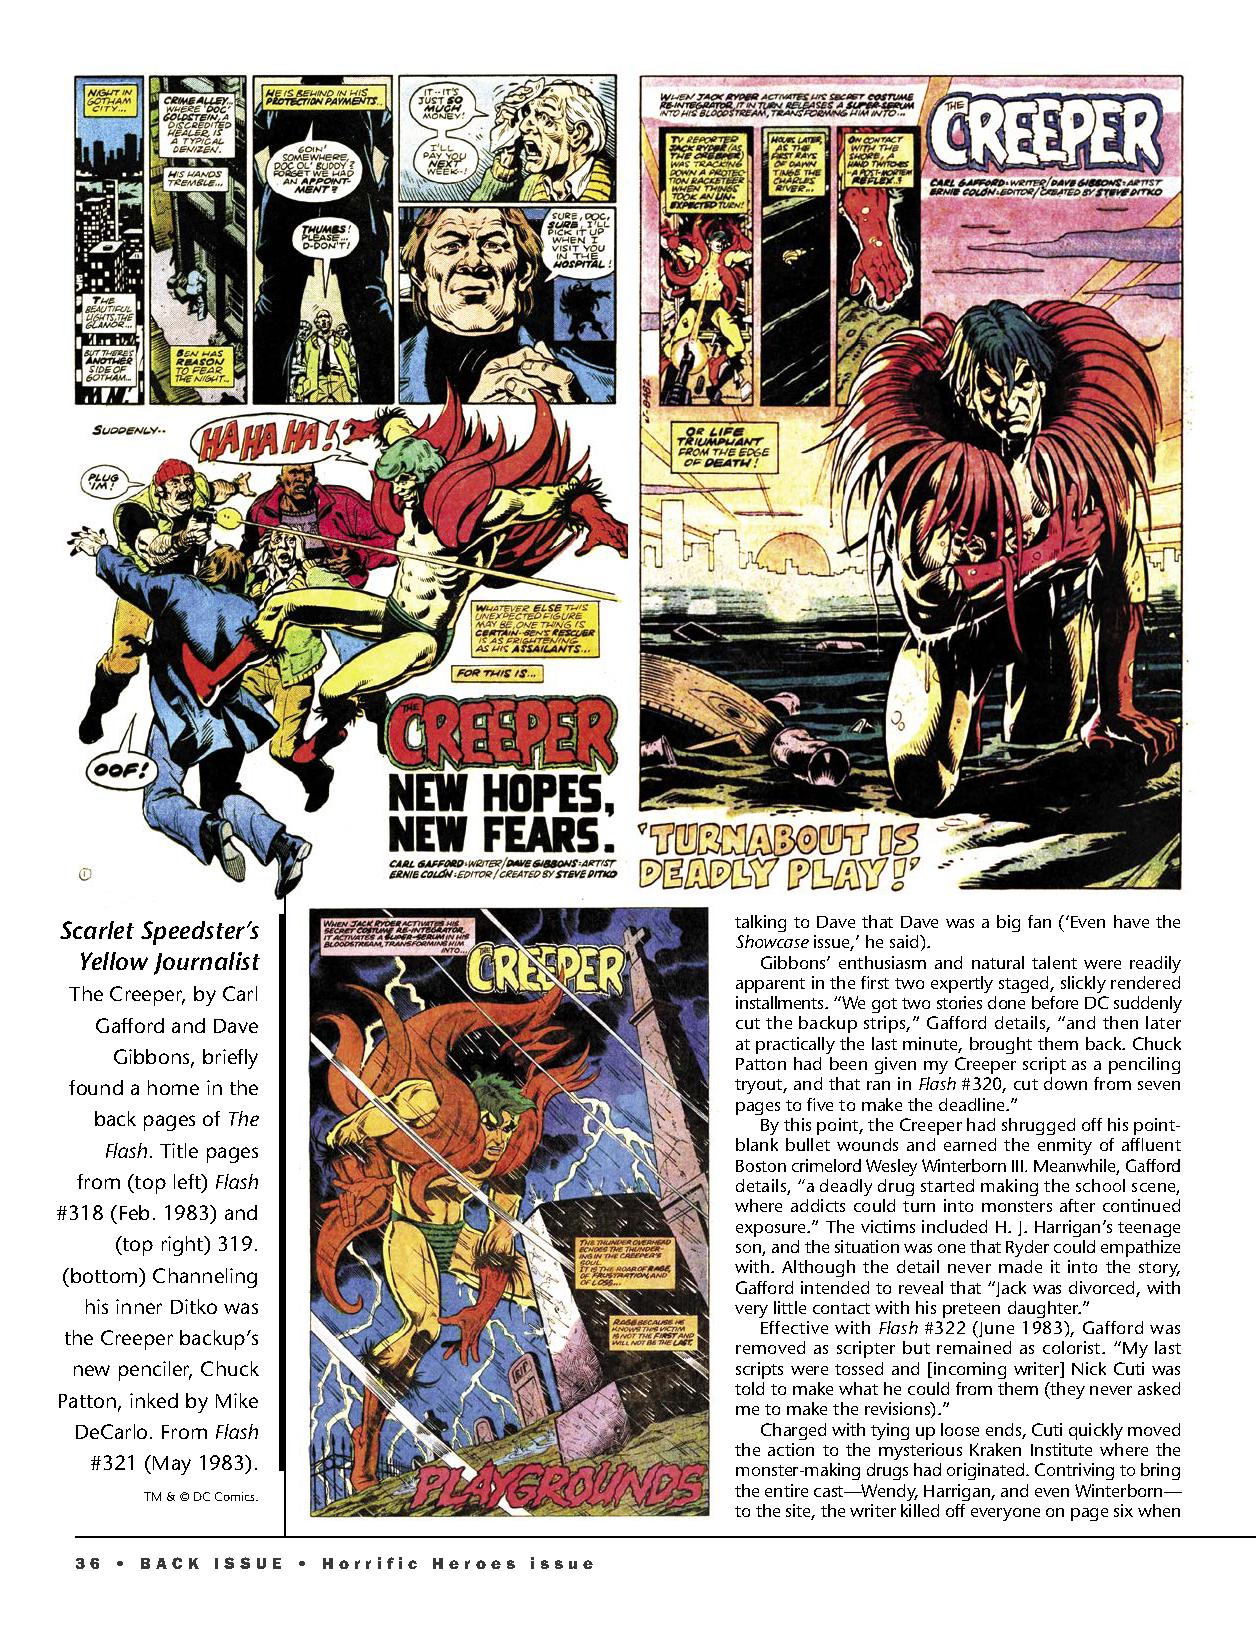 Read online Back Issue comic -  Issue #124 - 38